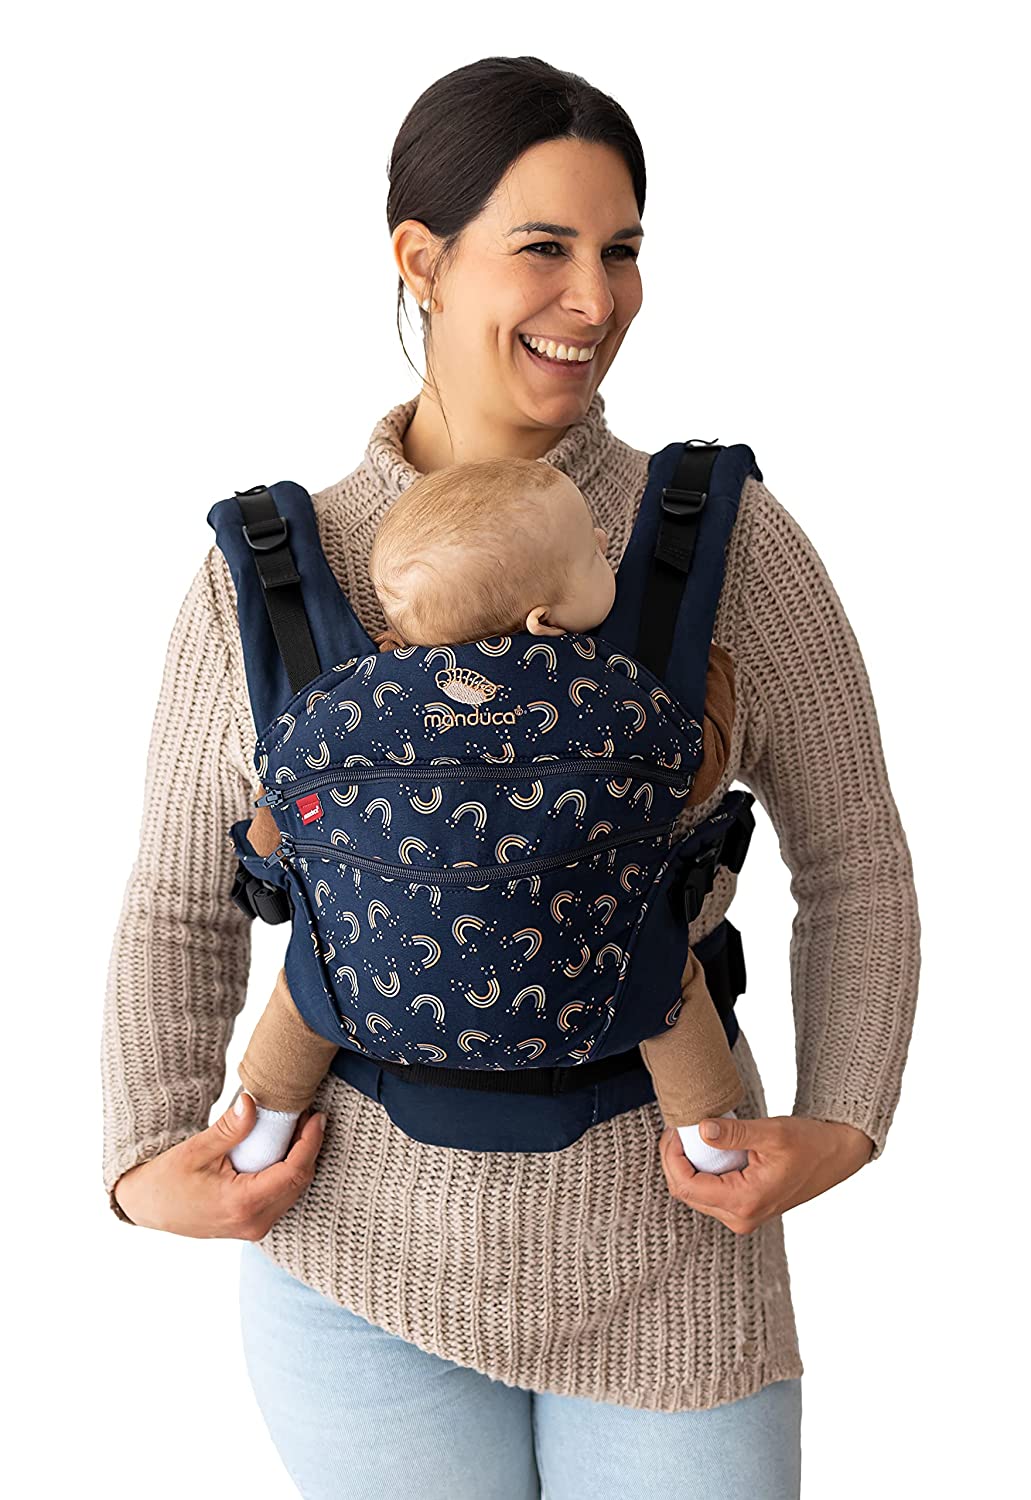 manduca XT Baby Carrier < All-In-One Baby Carrier for Newborns from Birth, Babies & Toddlers (3.5-20 kg), Adjustable Seat, 3 Carrying Positions, Organic Cotton (XT Limited Edition, RainbowNight)